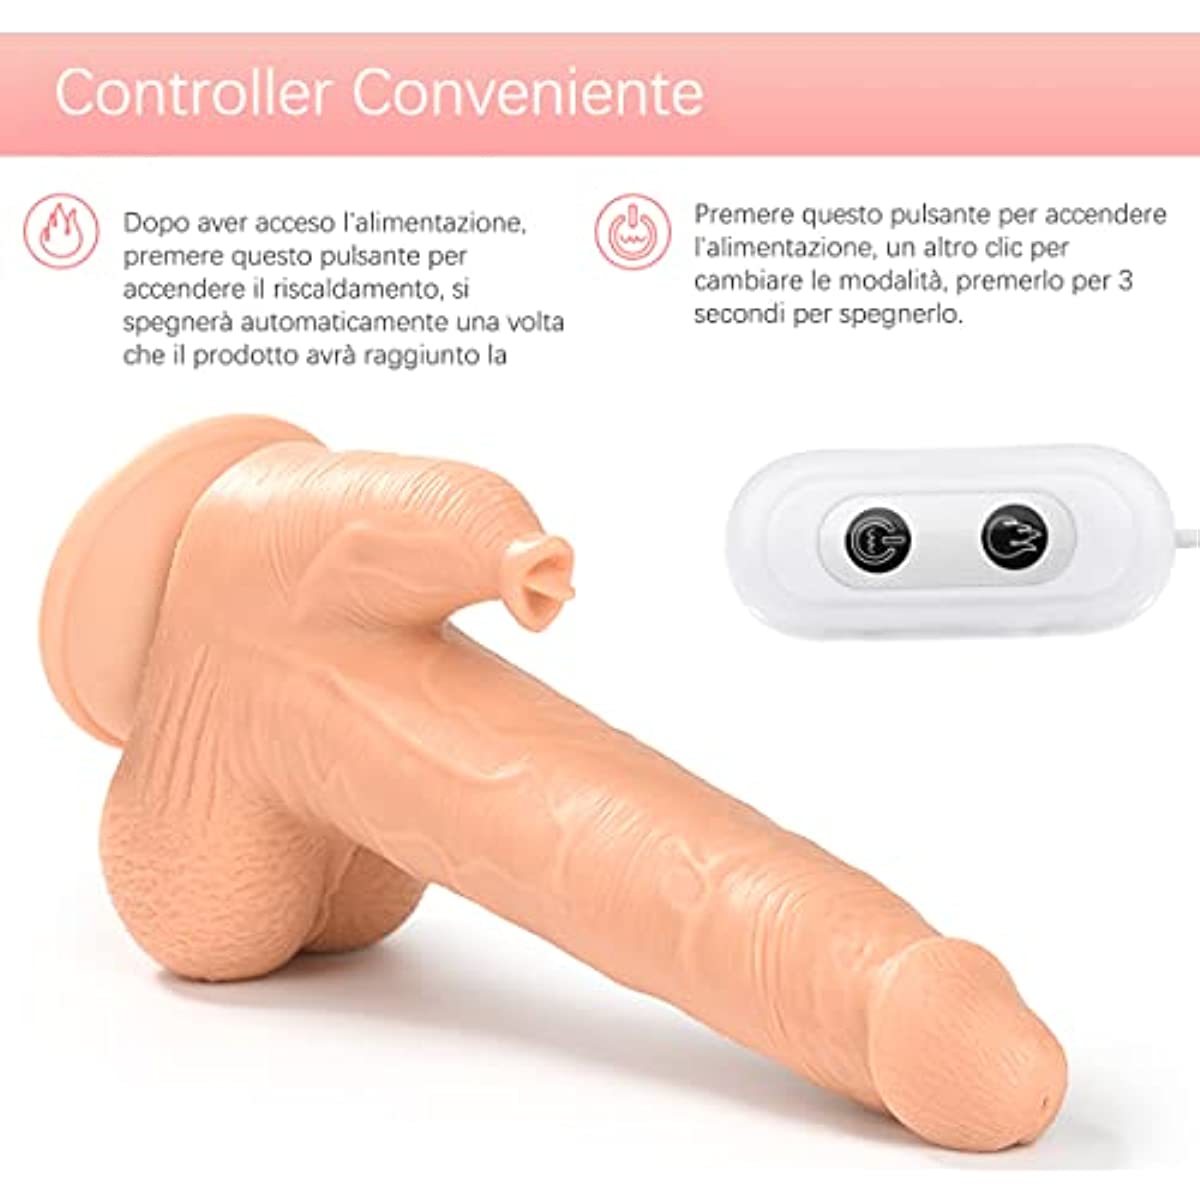 8.9in 4-in-1 Realistic Dildo with Shock G-Spot Function